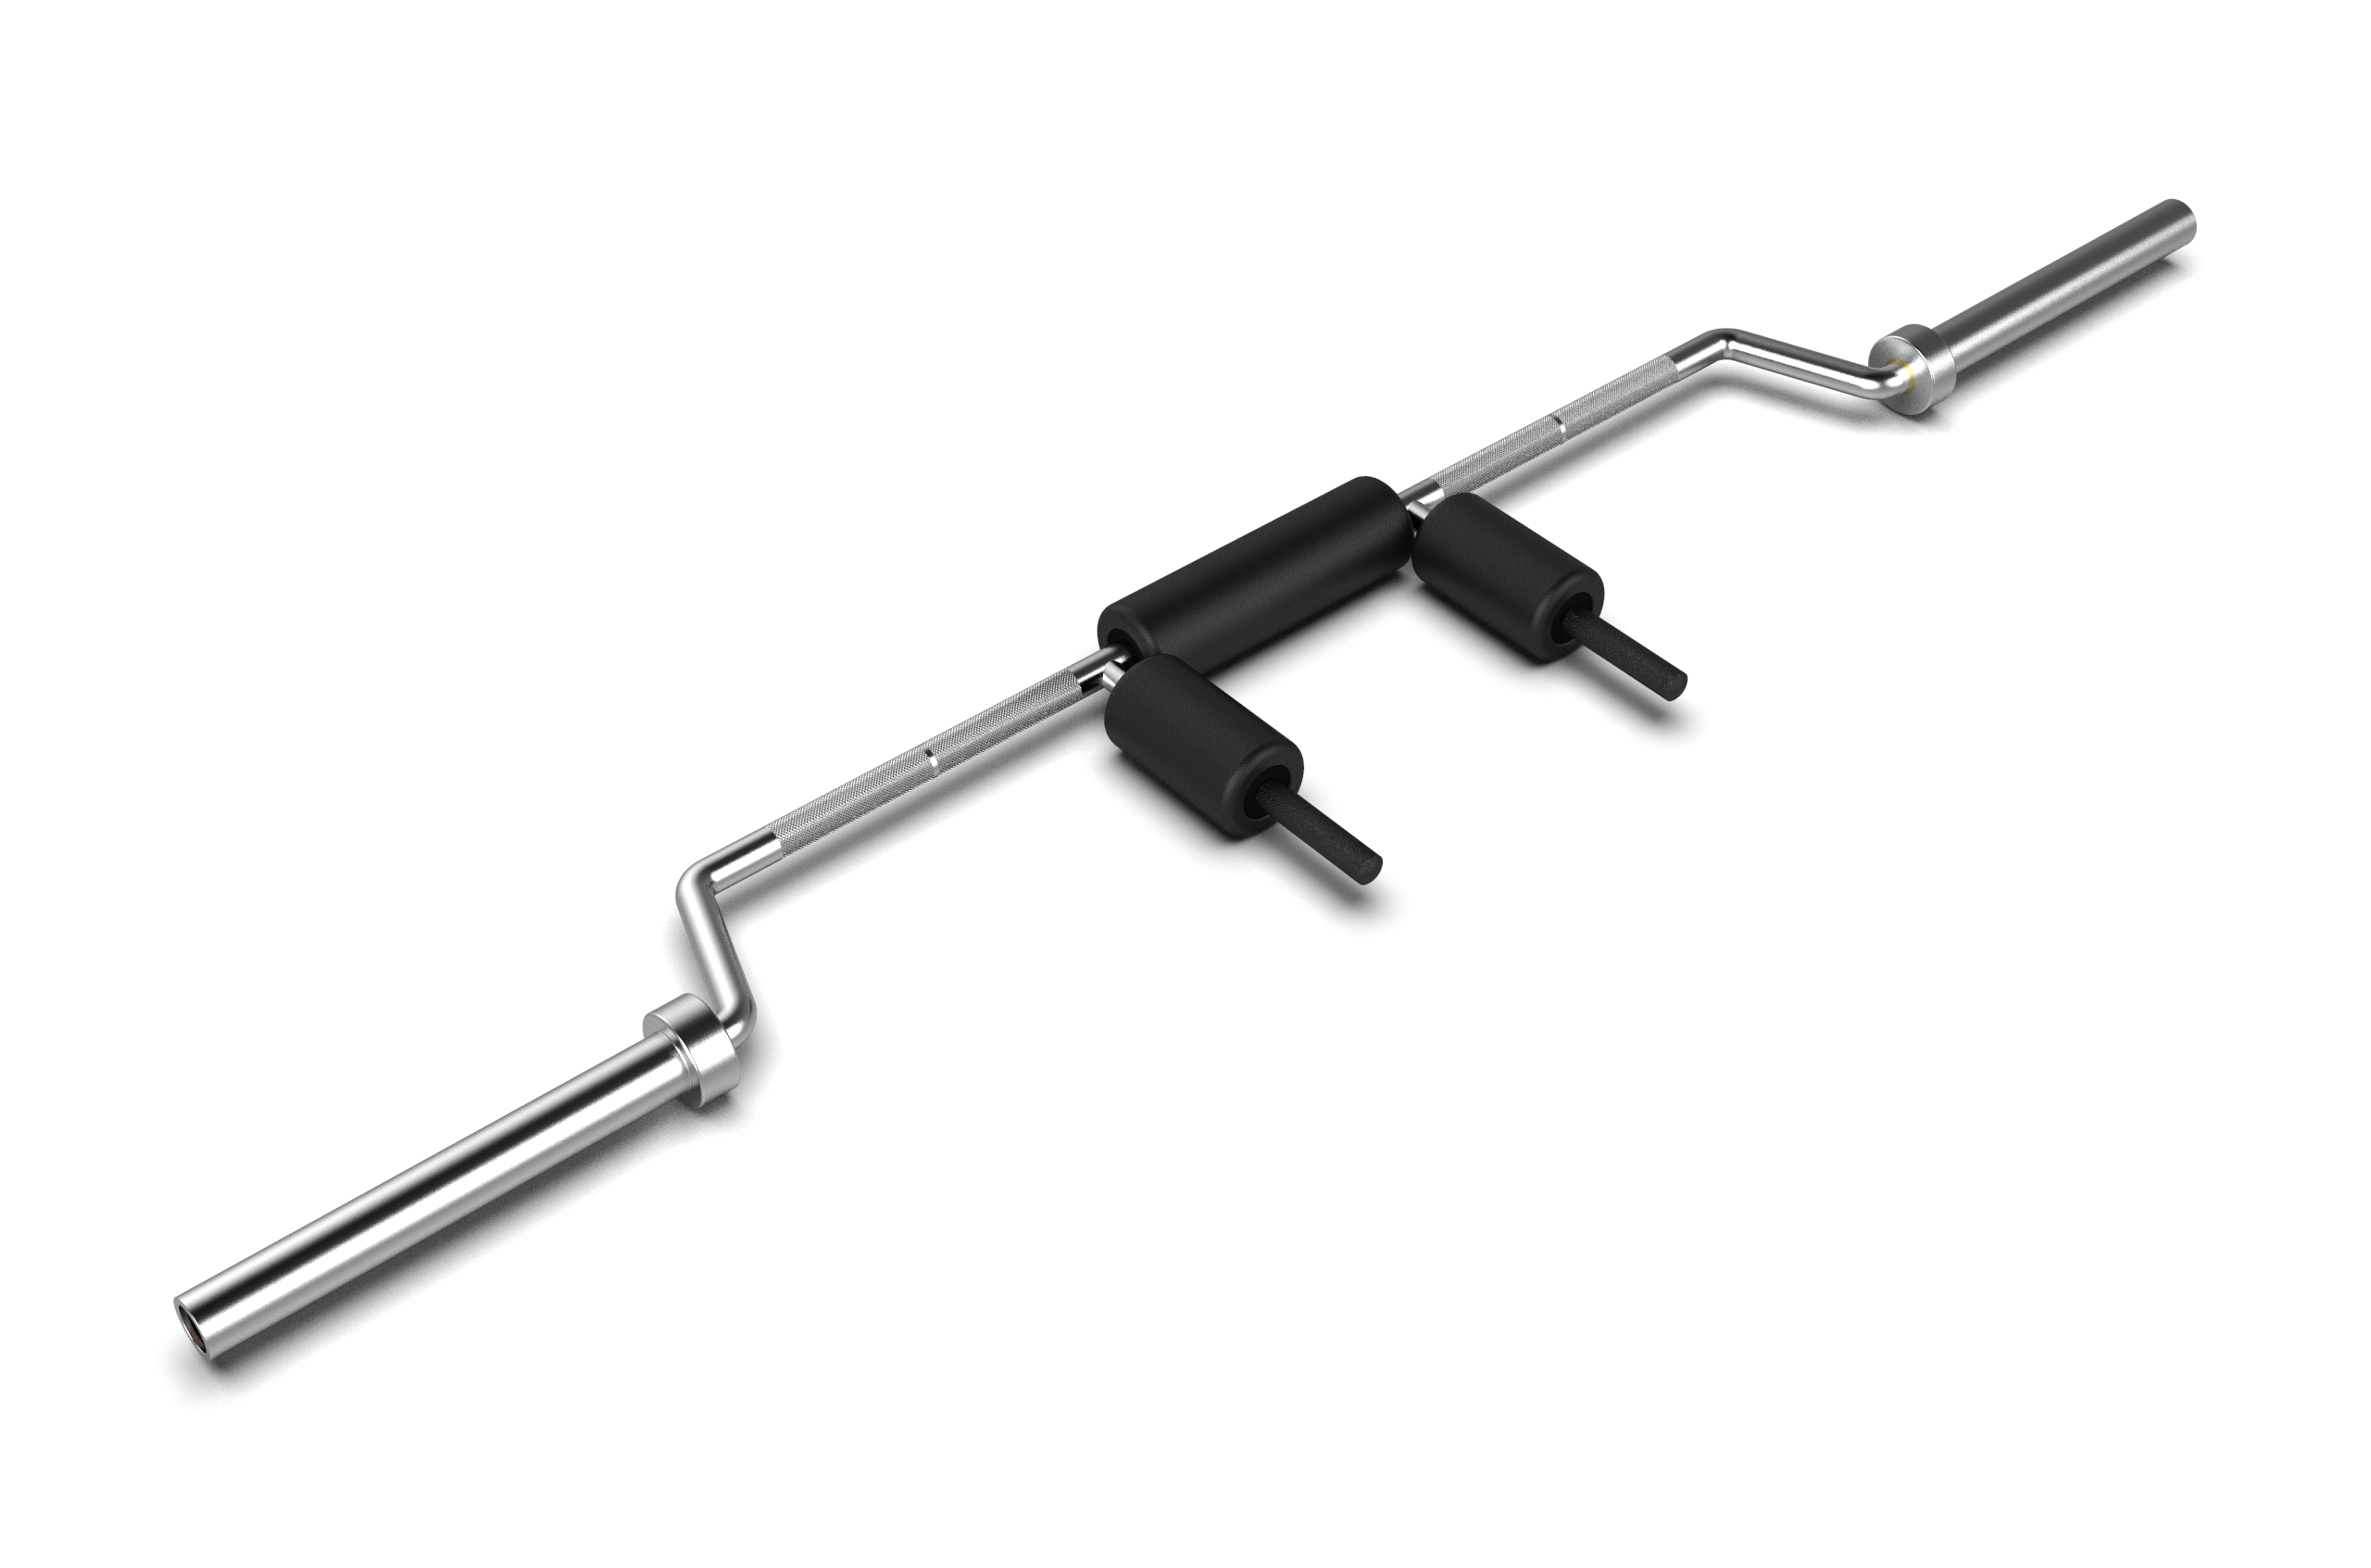 Band Bar Elite Solid Stainless Fitness Bar